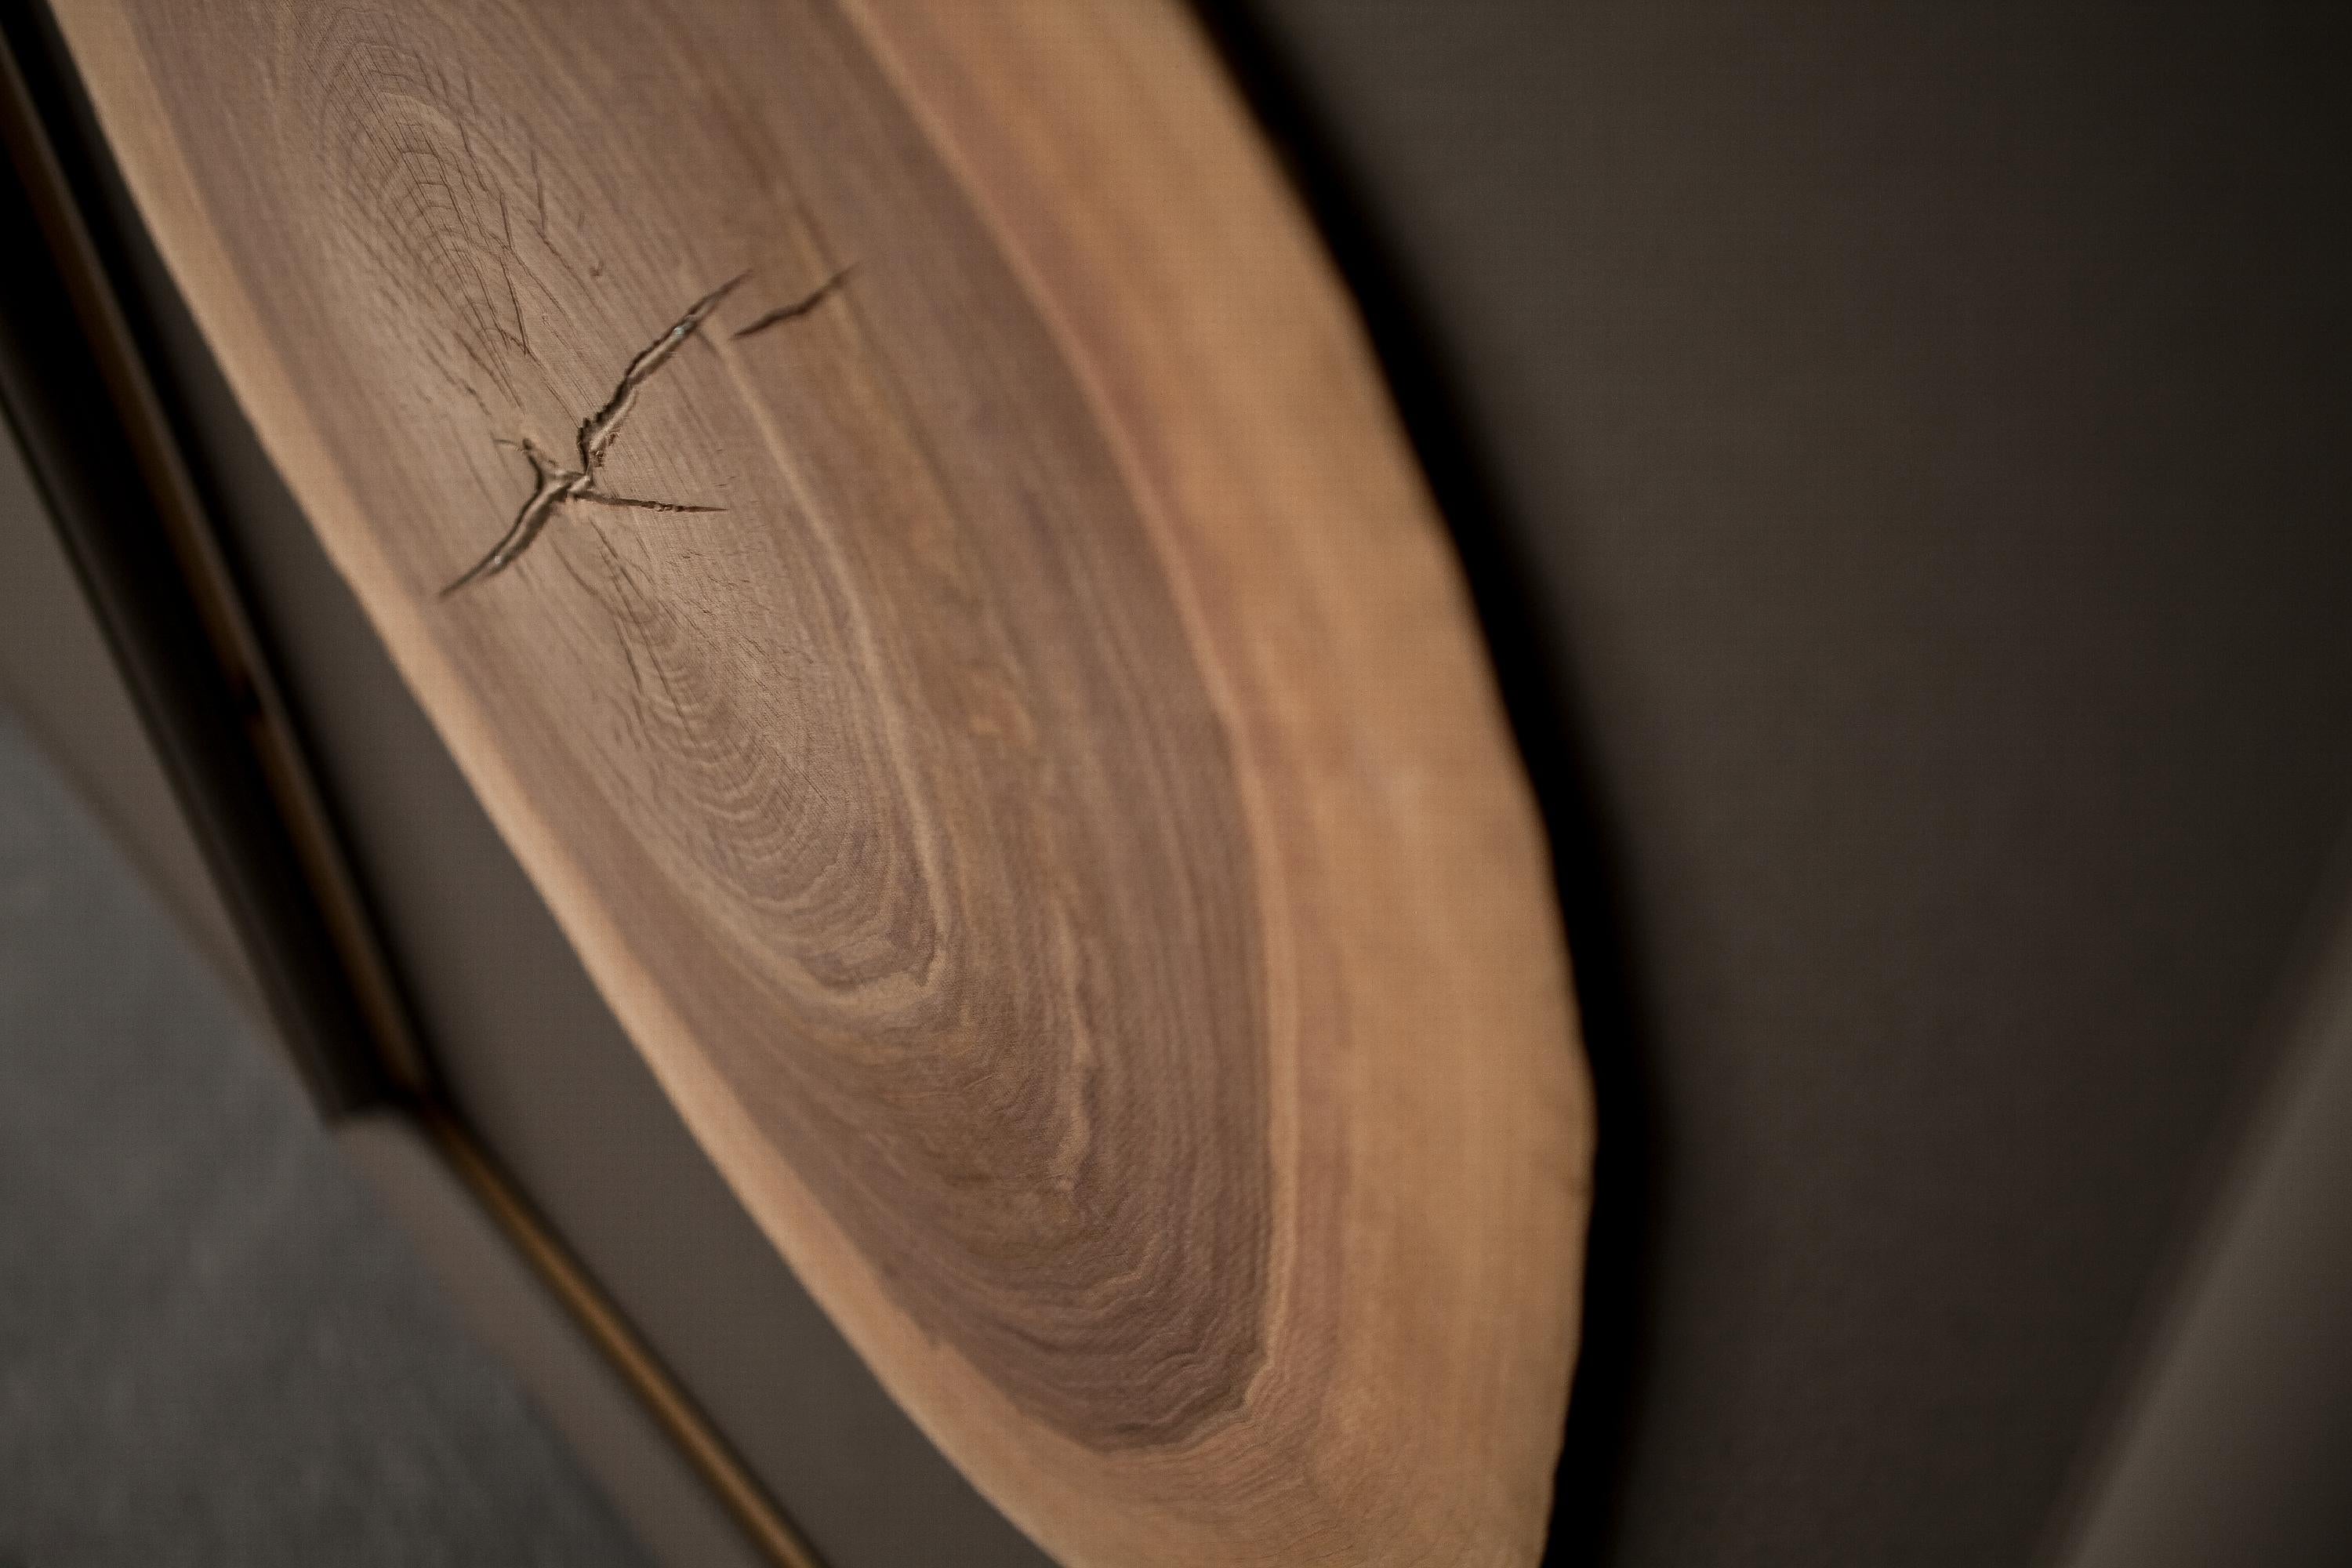 Made entirely using artisanal methods. Top veneered in sliced oak trunk, debarked and sanded by hand. Variable diameter depending on the cross-section of the tree trunk. The thin metal support has chromatic variations obtained by hand, through